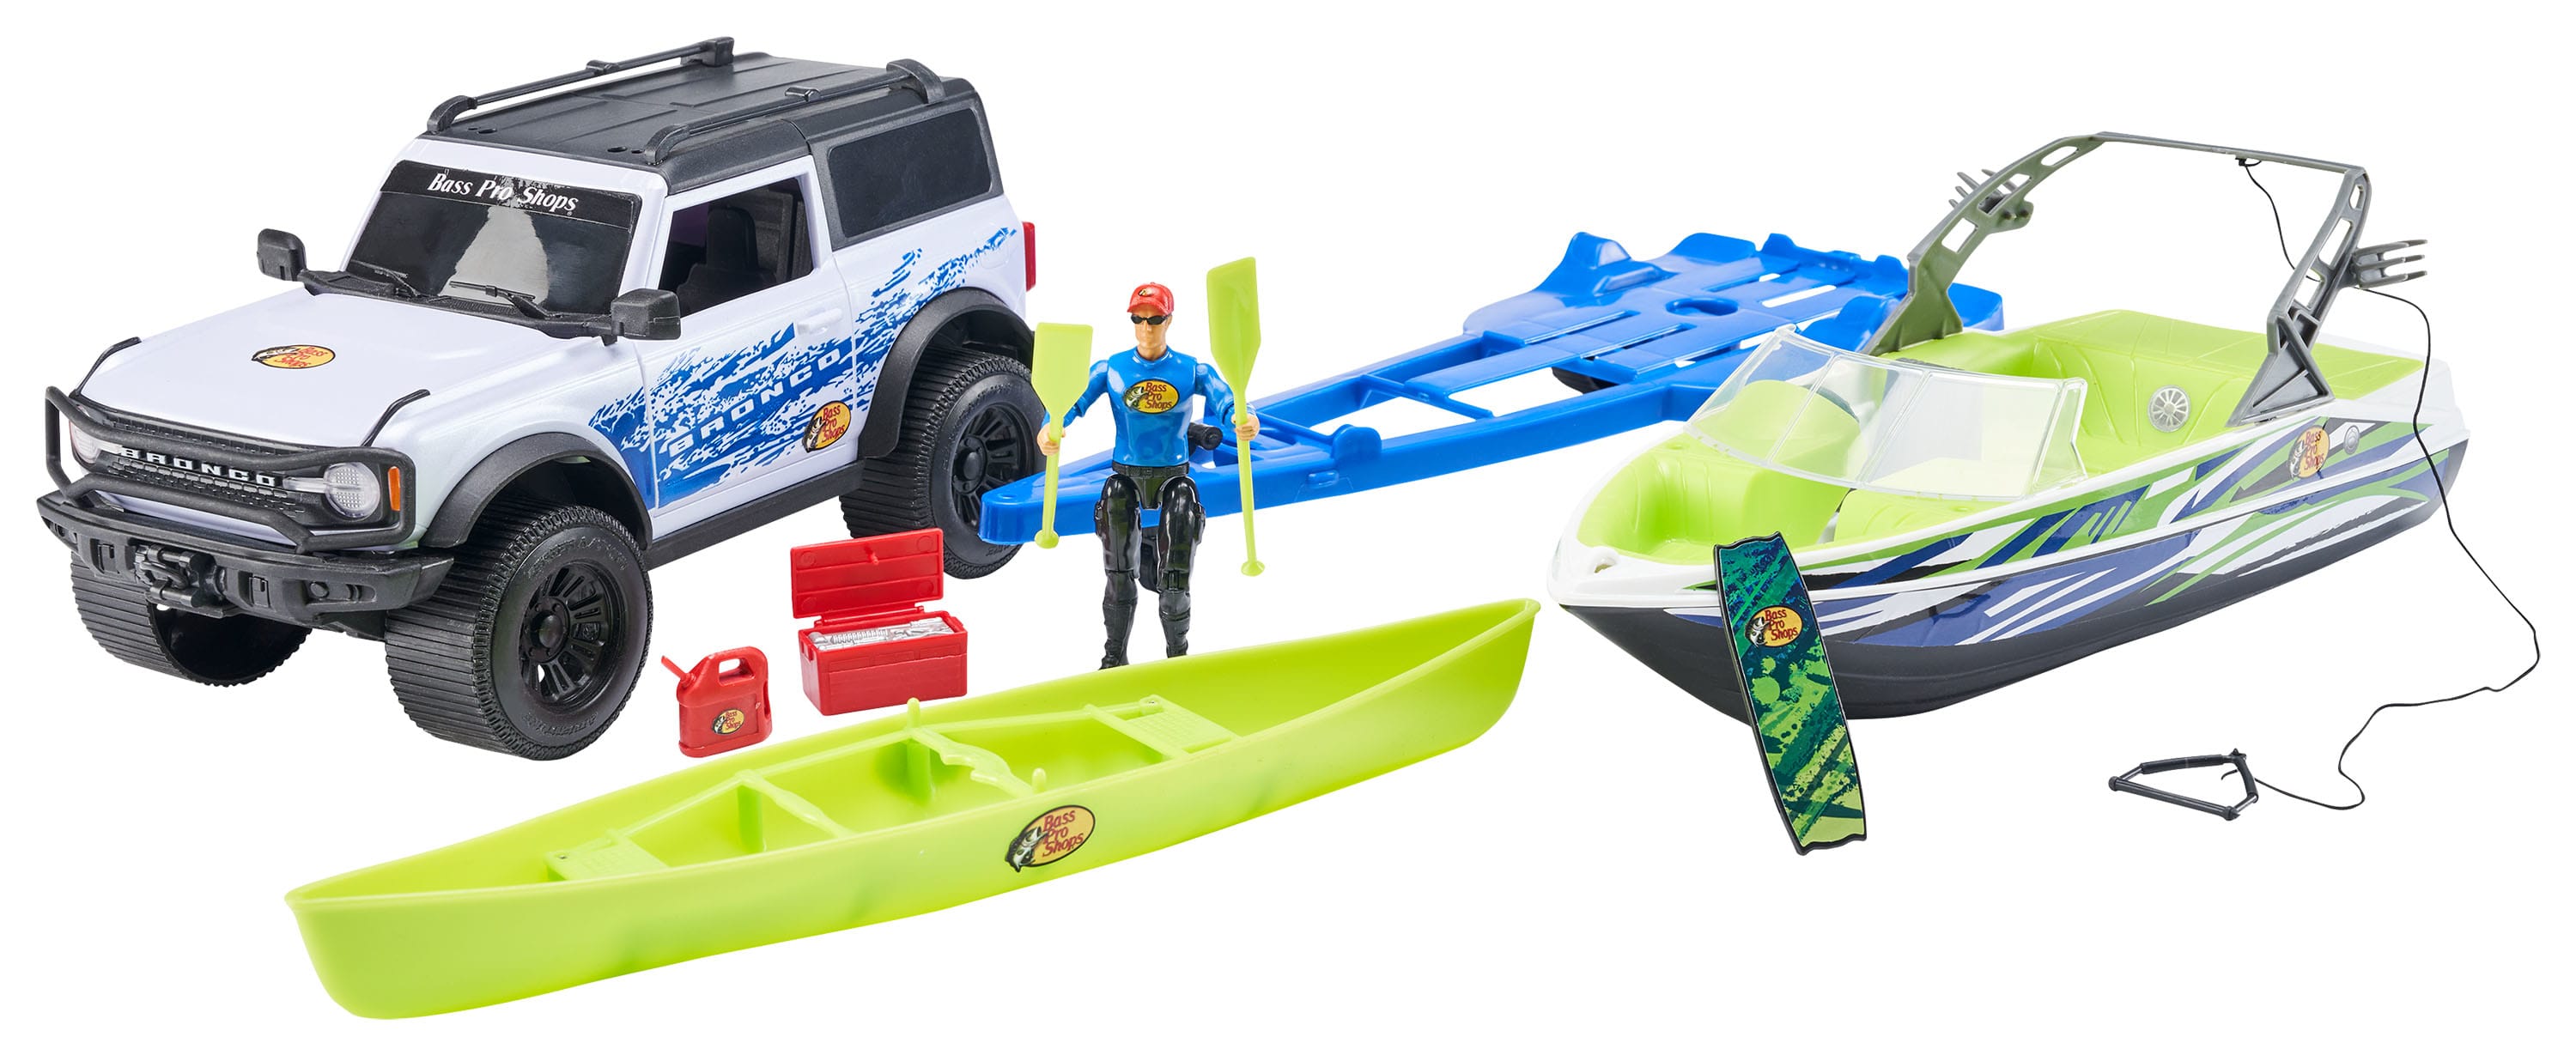 Bass Pro Shops® Deluxe Ford® Bronco® Wake Boat Adventure Playset for Kids